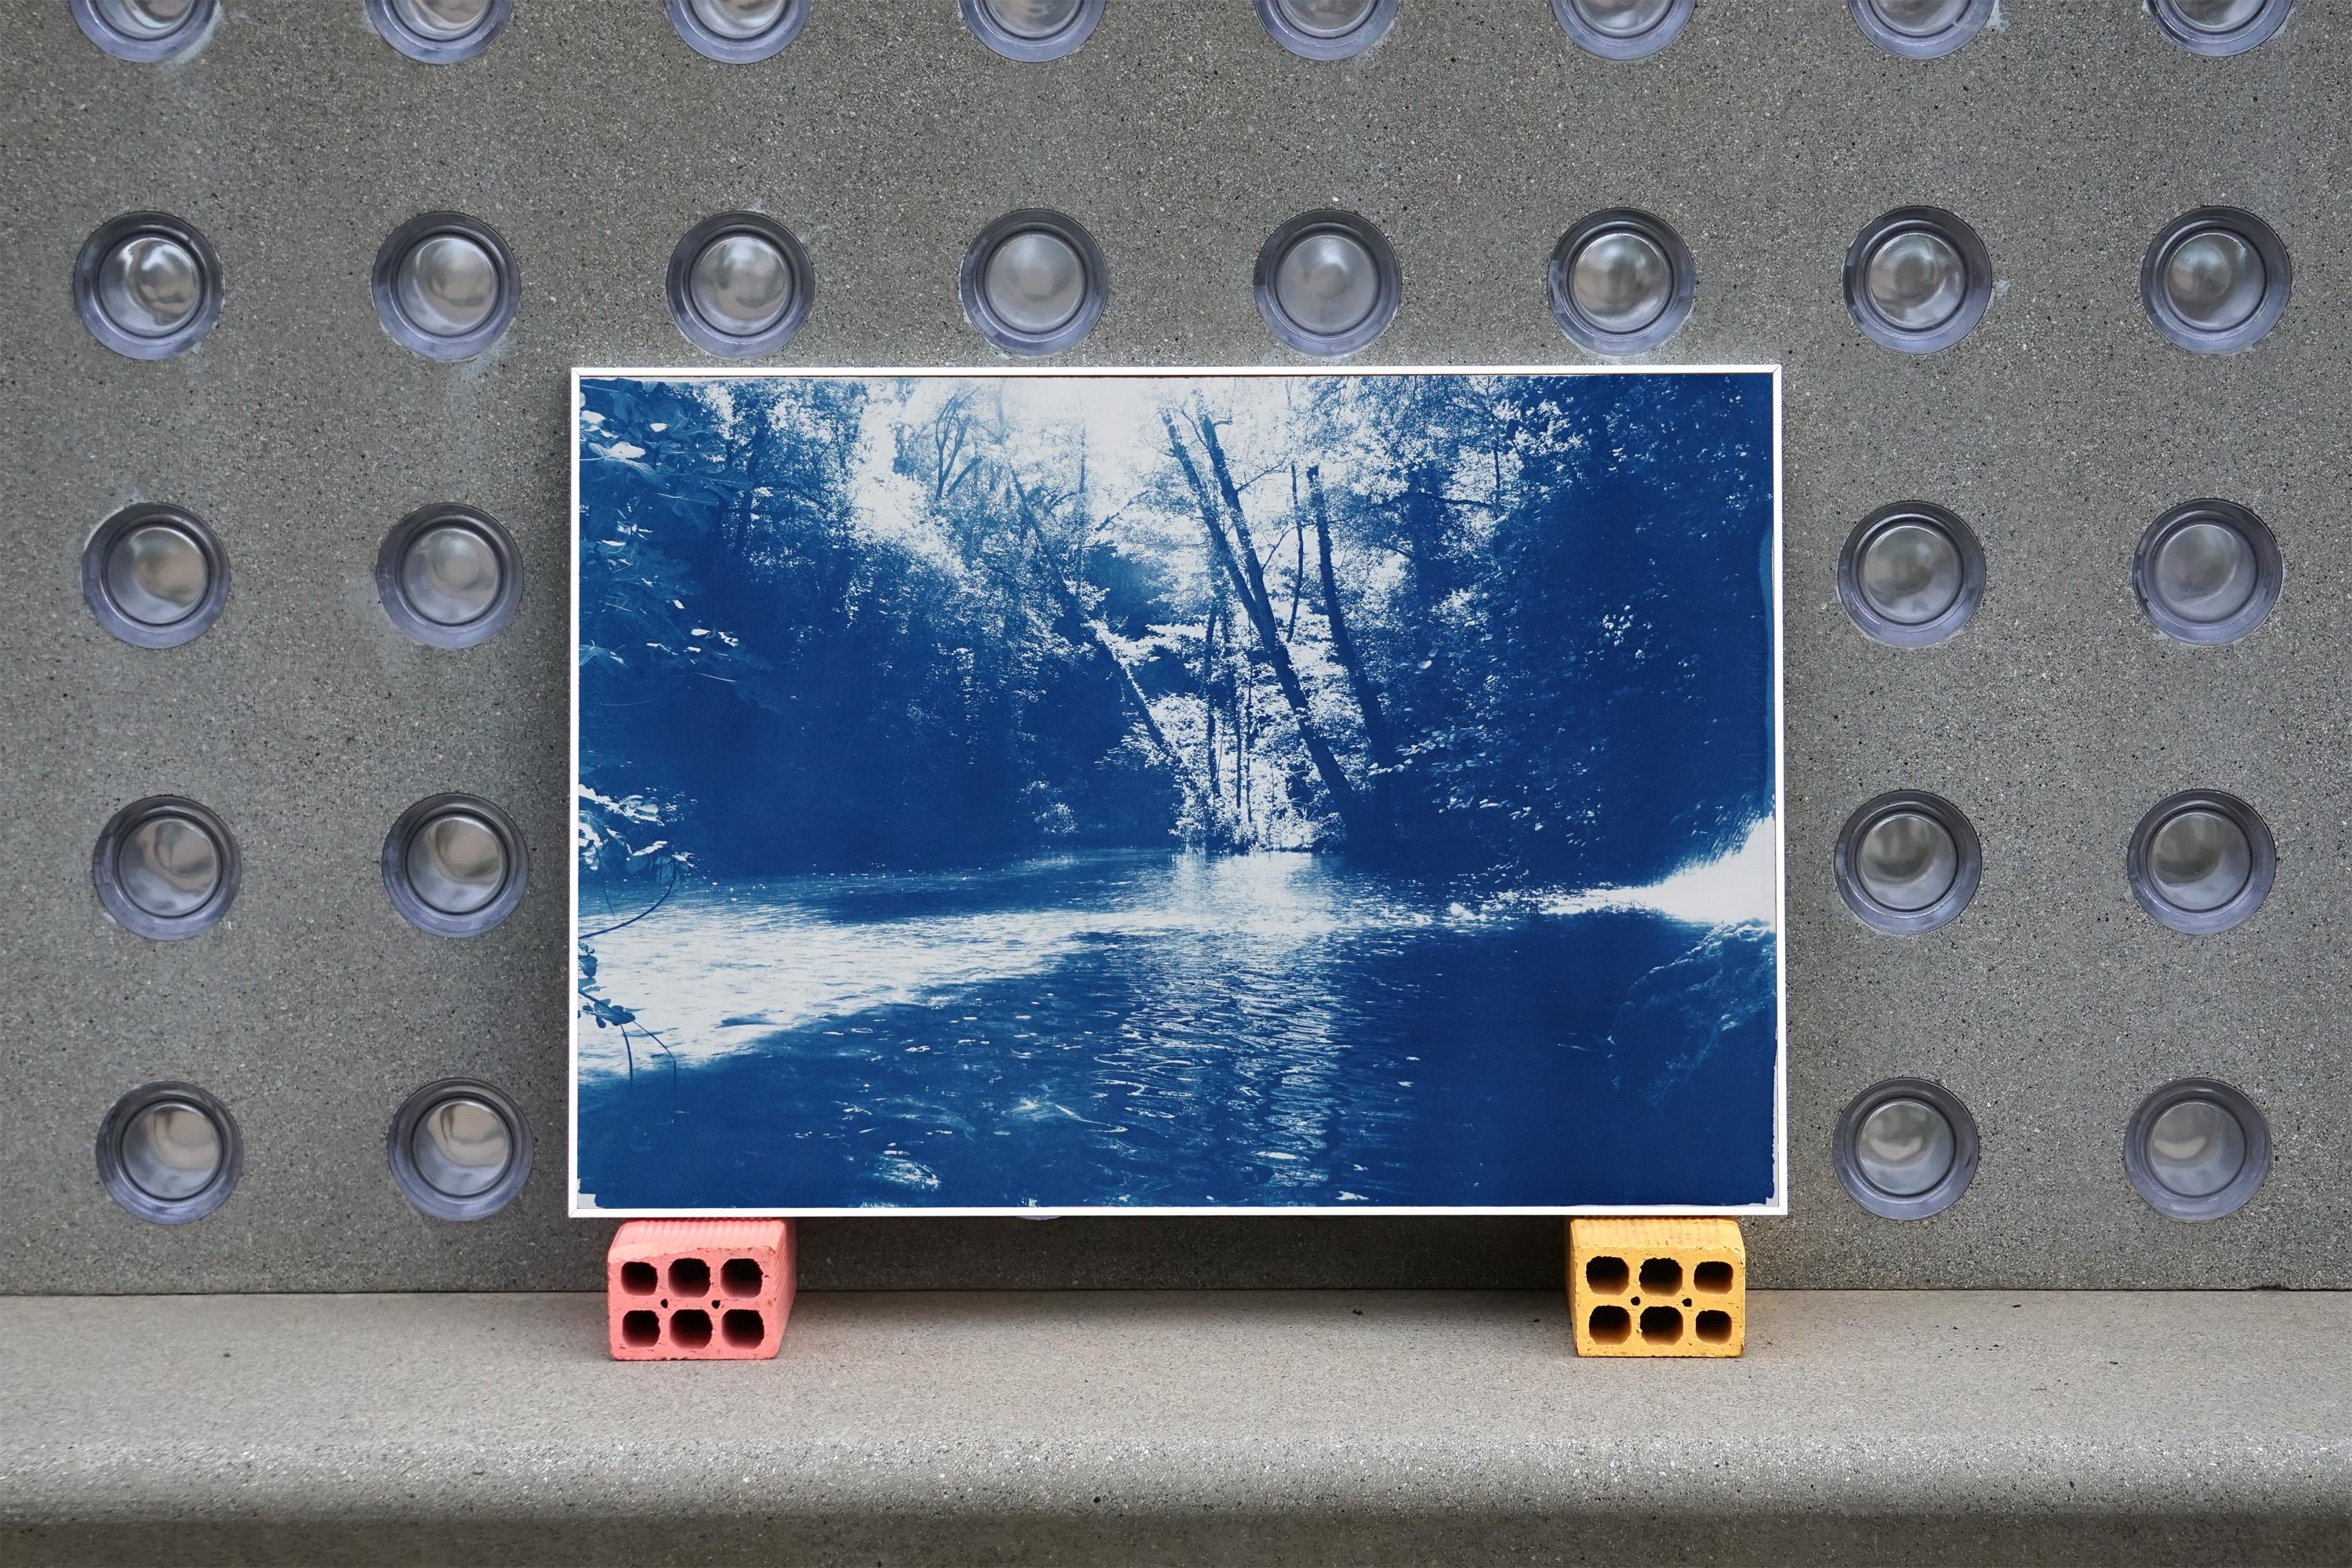 This is an exclusive handprinted limited edition cyanotype.
Lovely scene of a hidden pond in a Scandinavian forest.  

Details:
+ Title: Scandinavian Enchanted Forest
+ Year: 2021
+ Edition Size: 50
+ Stamped and Certificate of Authenticity